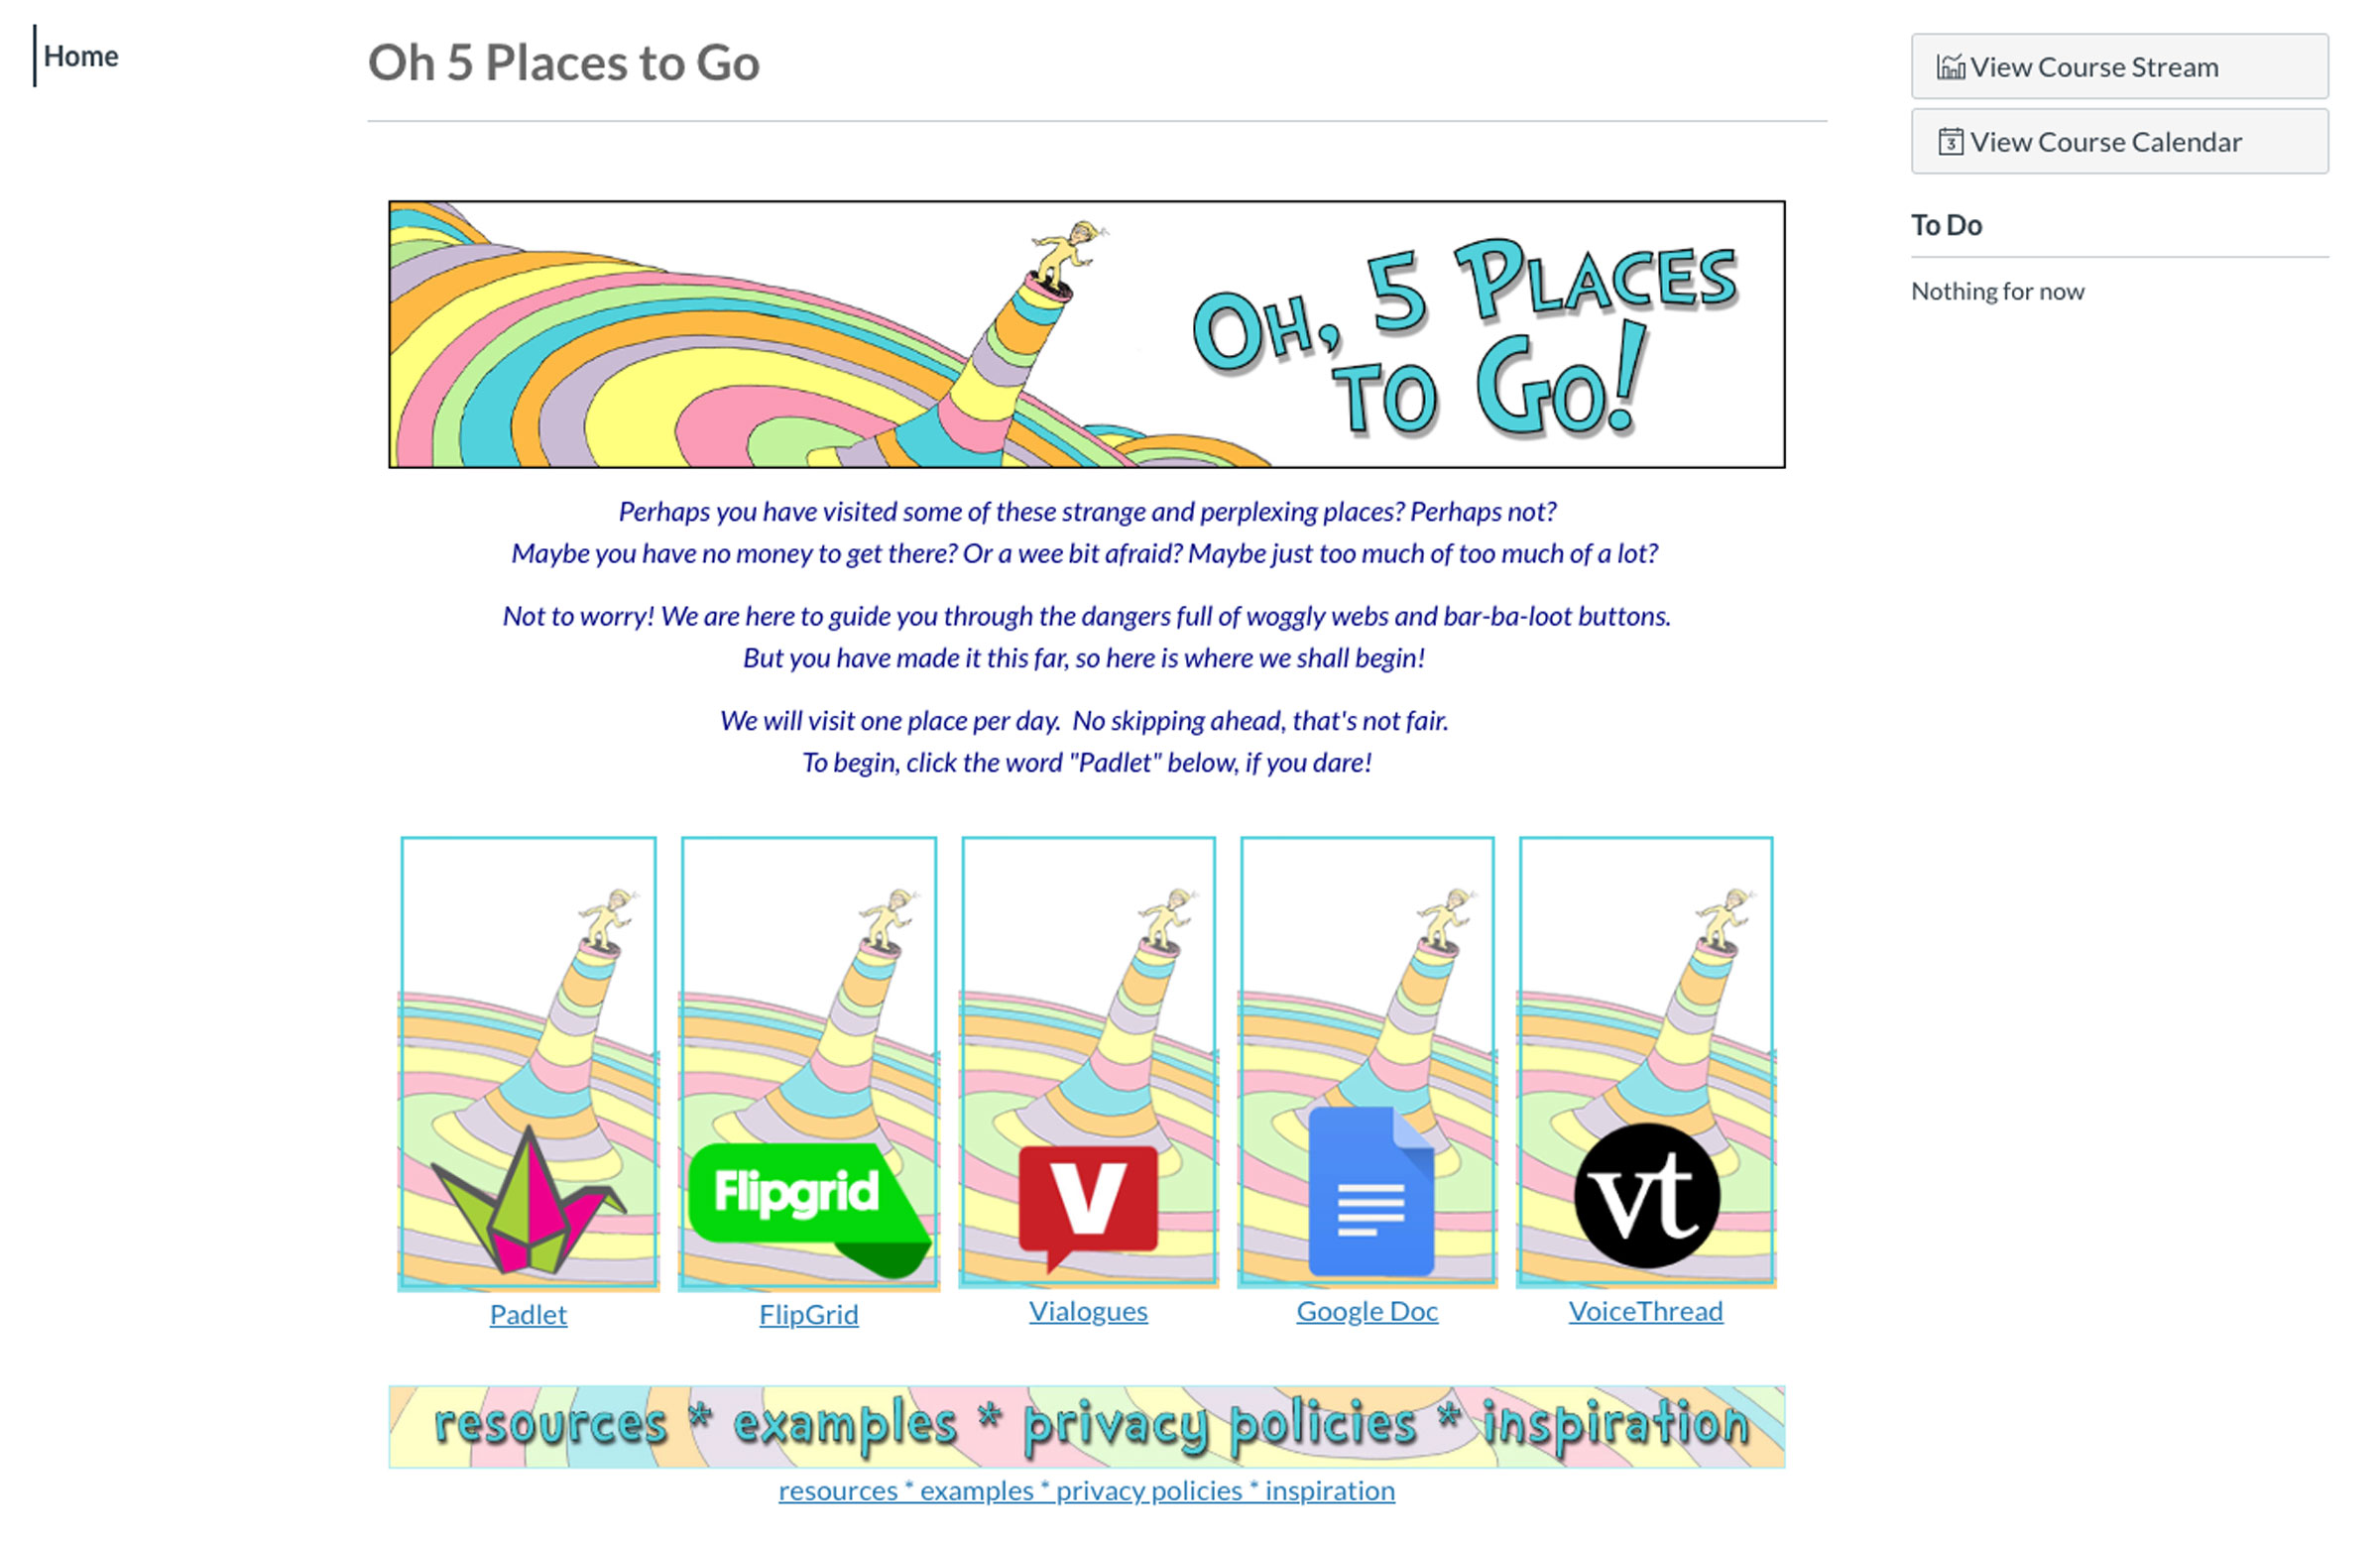 homepage for the class, "Oh the Places You'll Go!"